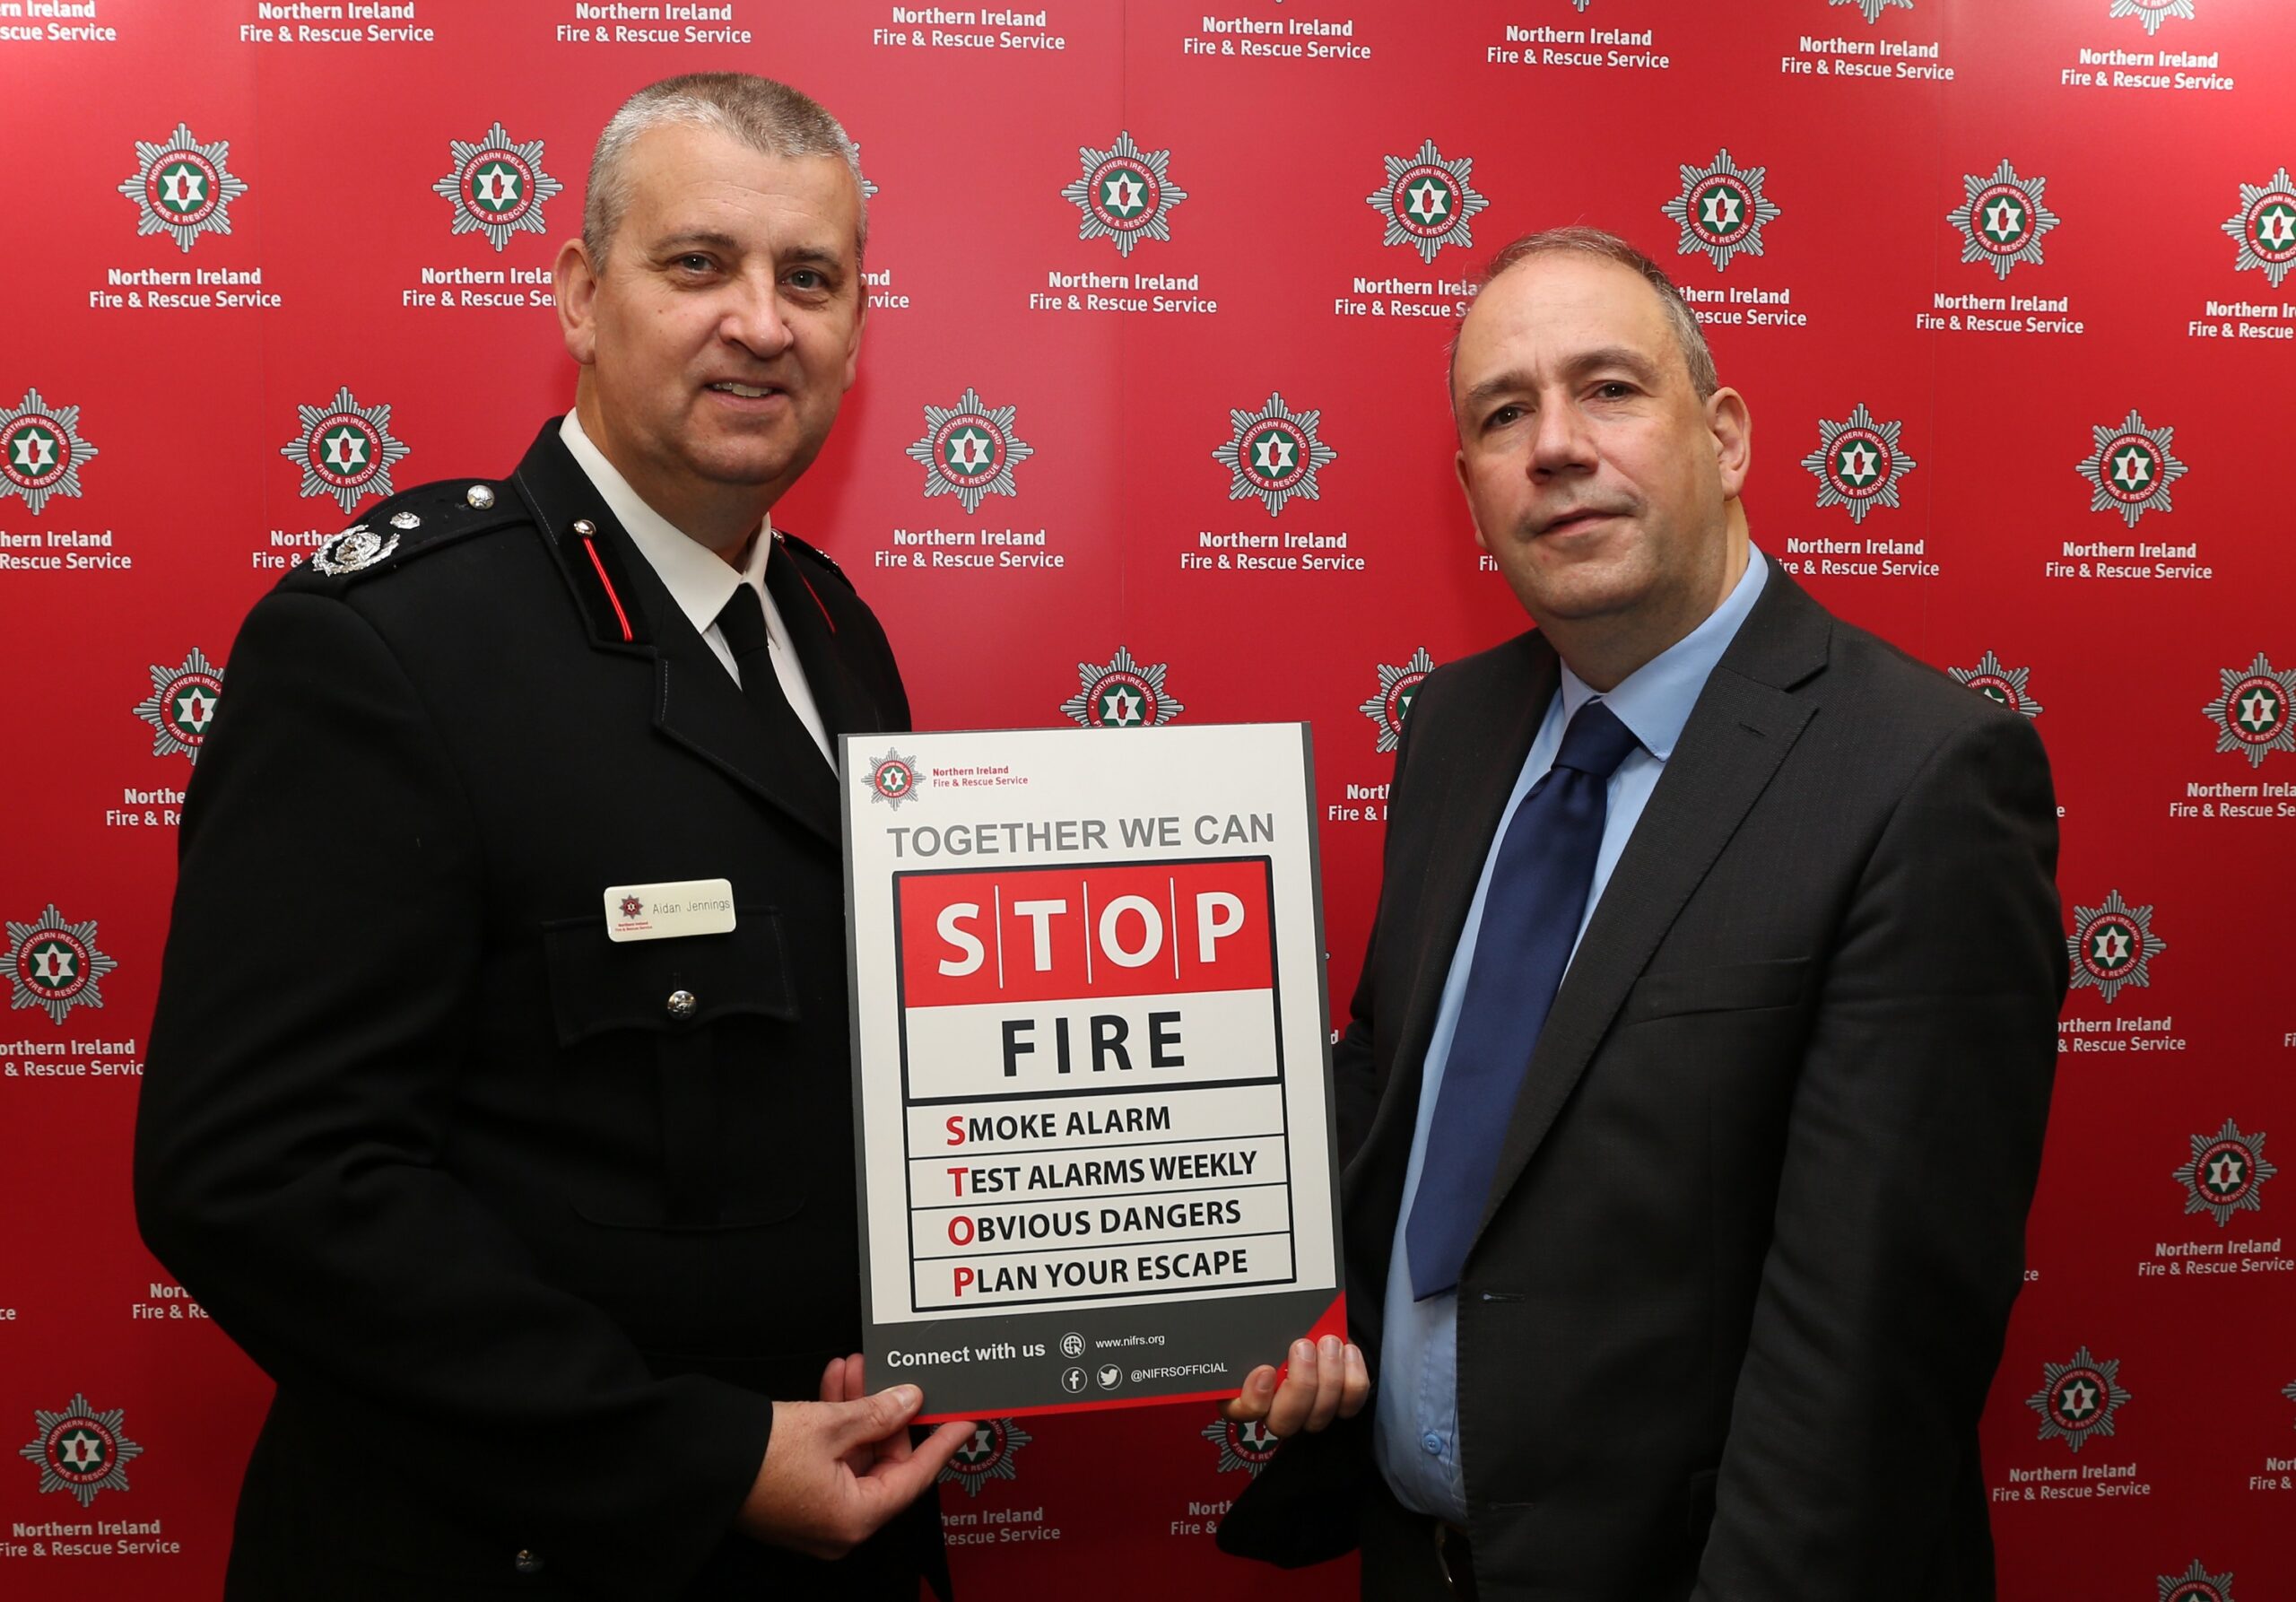 (l-r) Assistant Chief Fire & Rescue Officer Aidan Jennings, Northern Ireland Fire & Rescue Service (NIFRS) and Keith Leonard, National Director for Fire and Emergency Management, Ireland at the launch of North South Fire Safety Week 2023.